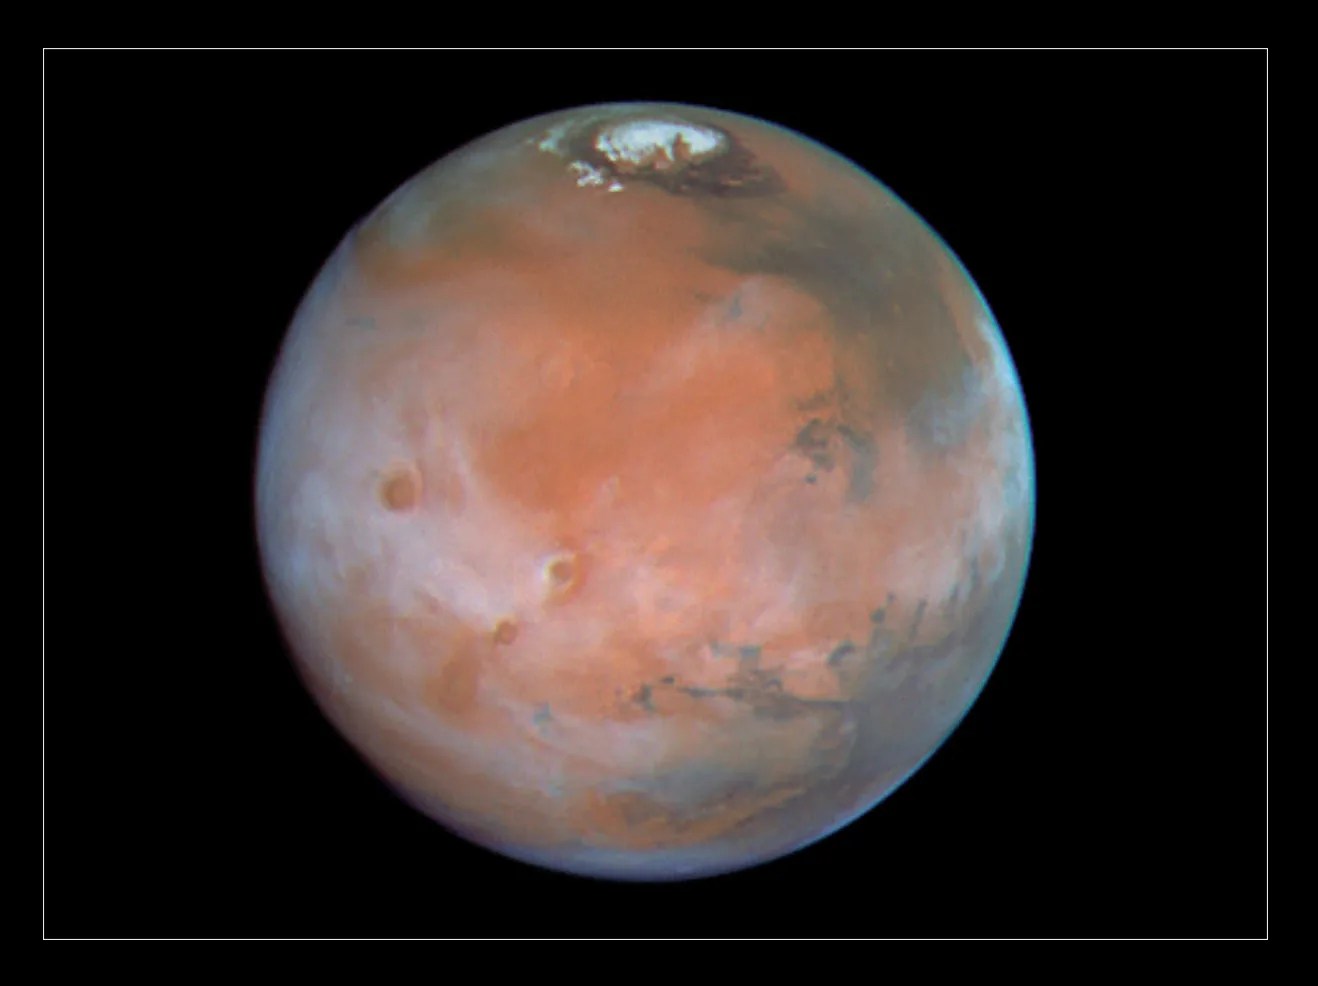 Rusty-red Mars with a haze of white clouds and a white north polar cap.